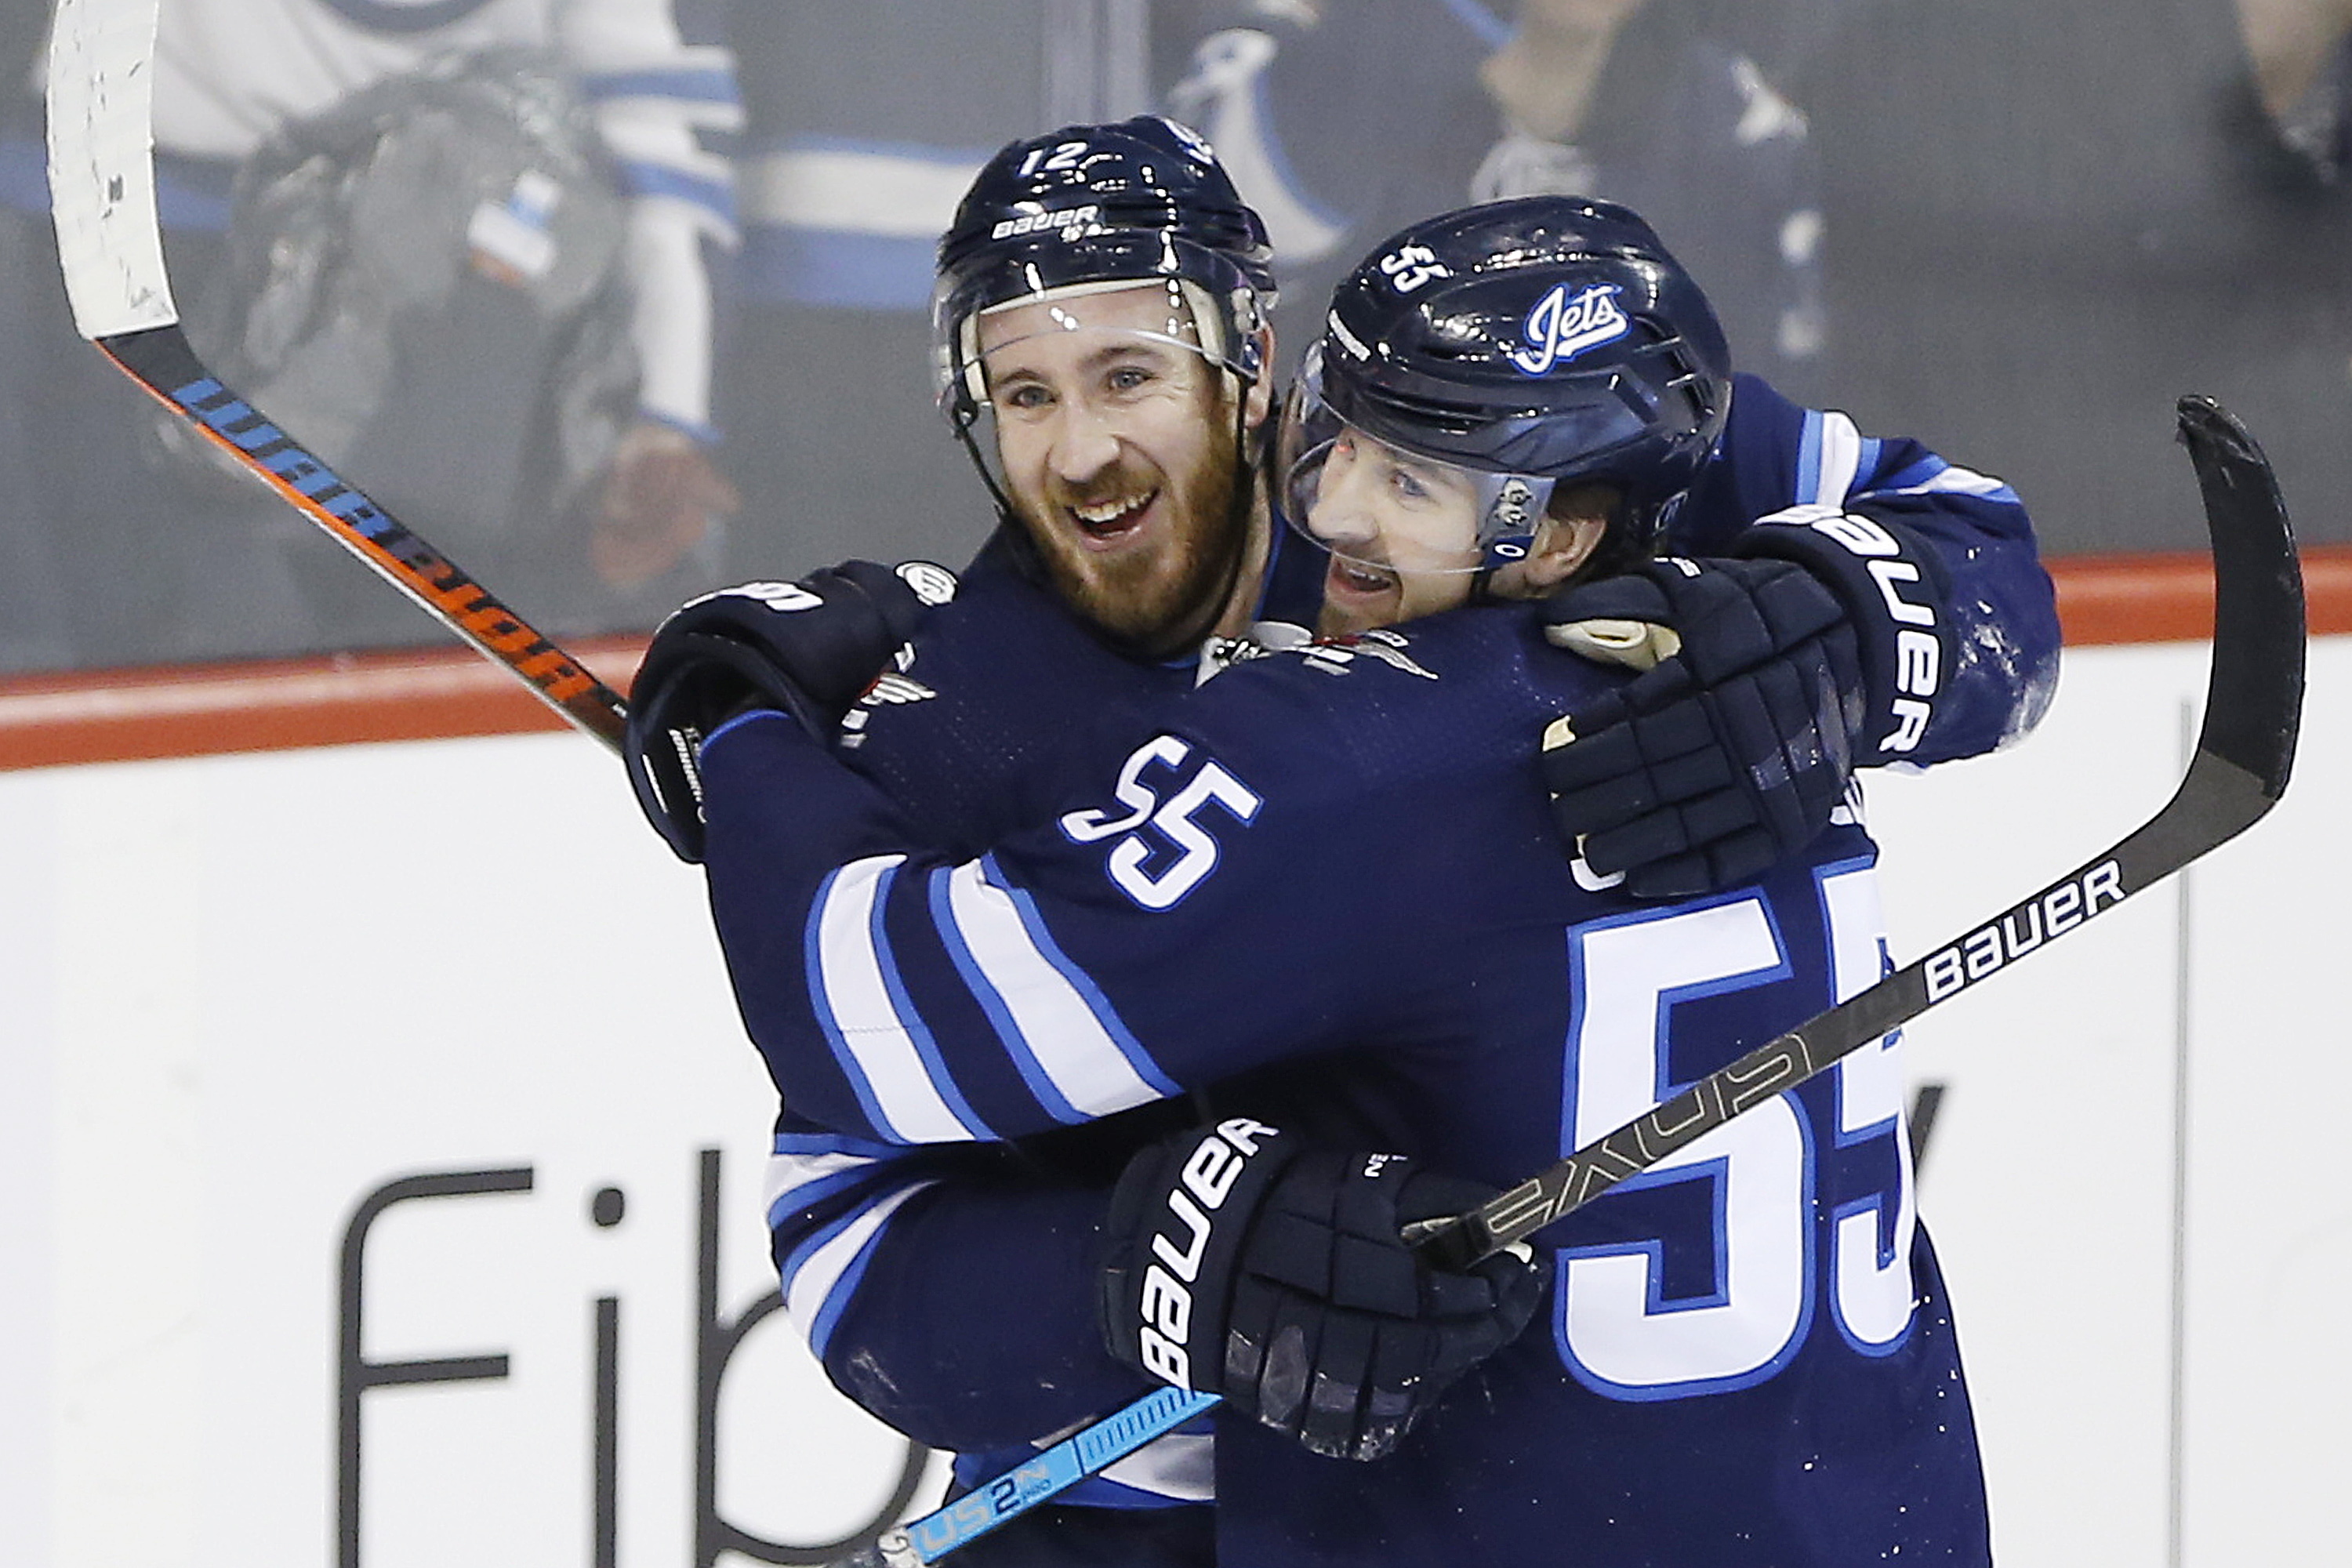 Hayes scores 1st goal with Jets in victory over Predators